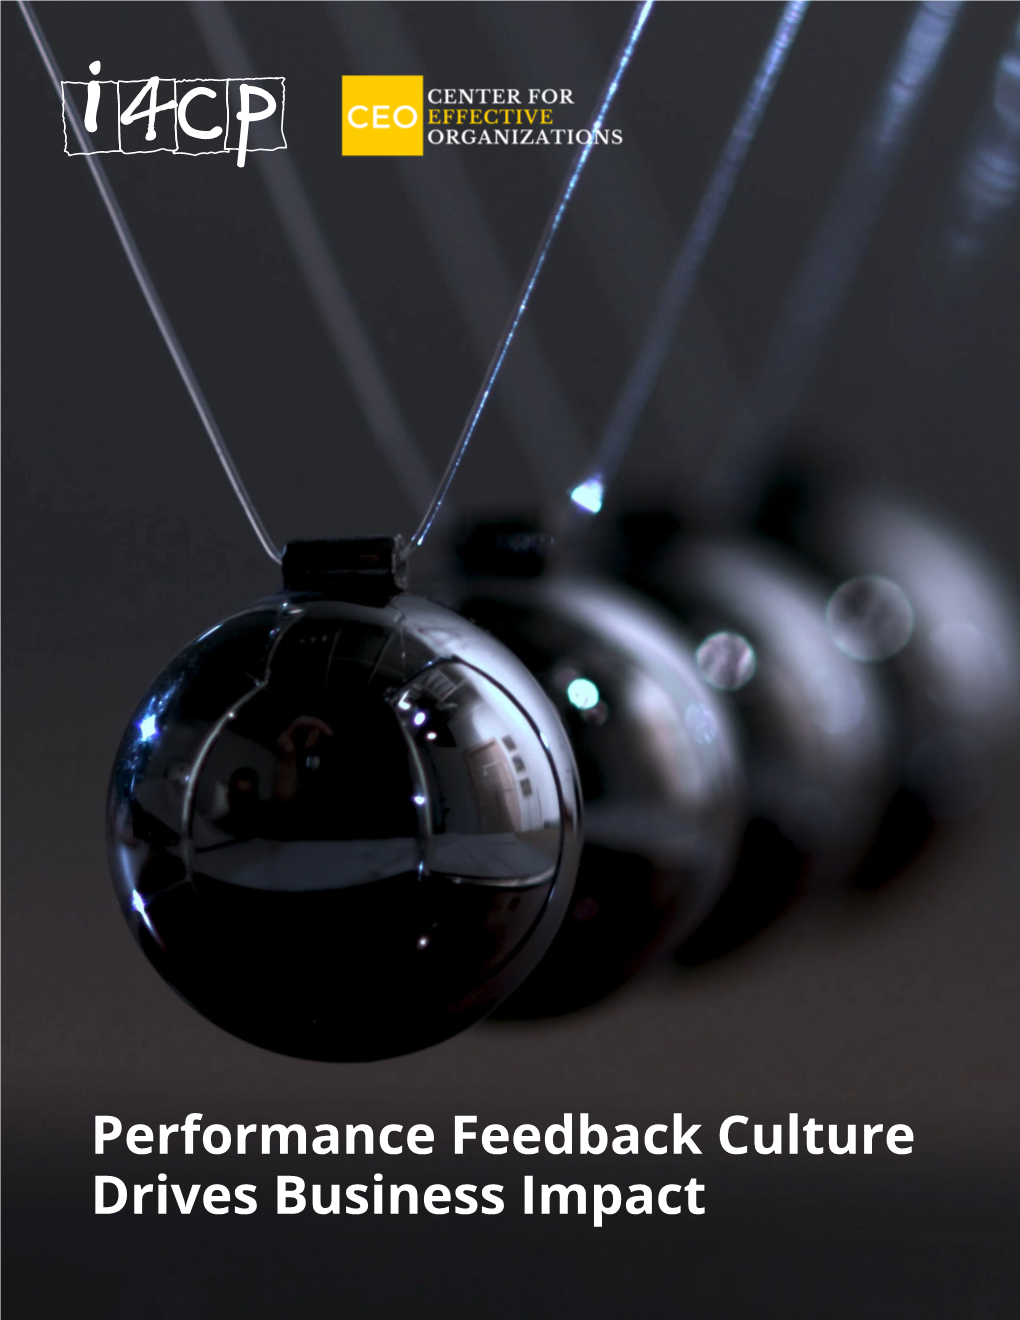 Performance Feedback Culture Drives Business Impact © 2018 by Institute for Corporate Productivity (I4cp) and the Center for Effective Organizations (CEO)